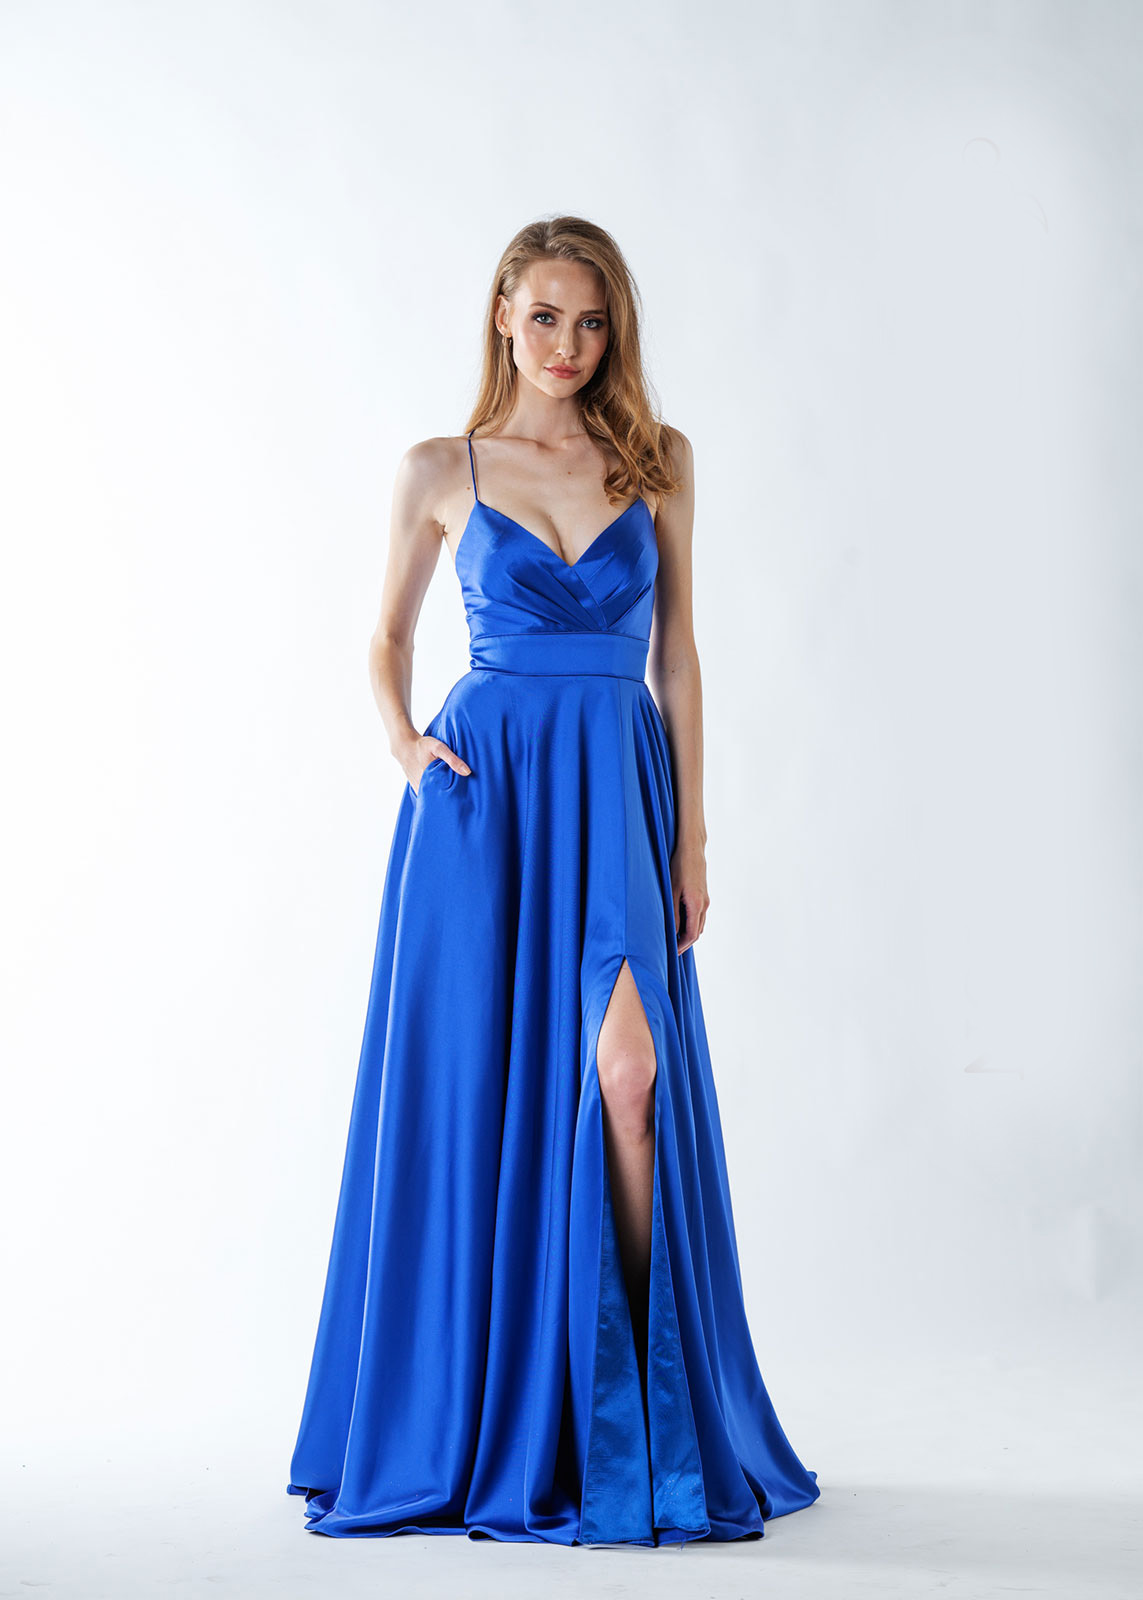 The truly elegant and flowng Madalina prom dress from MK Prom in Bletchley Milton Keynes in a fabulous sheer Royal blue satin fabric